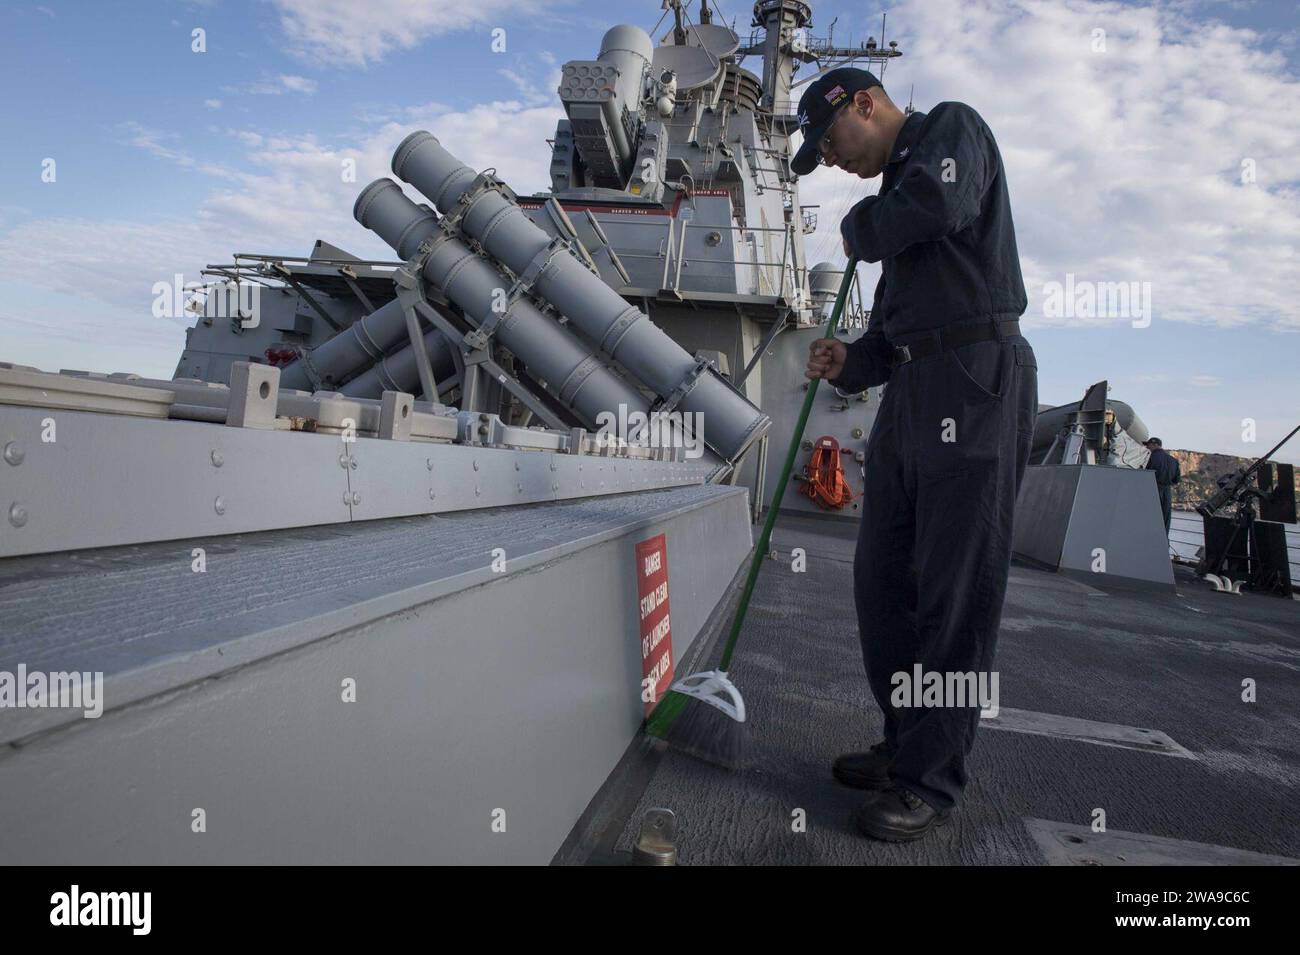 US military forces. 180616KP946-0003 MINORCA, Spain (June 16, 2018) Fire Controlman (Aegis) 2nd Class Nathan, Wickenkamp, from Portales, New Mexico, sweeps the deck aboard the Arleigh Burke-class guided-missile destroyer USS Donald Cook (DDG 75) June 16, 2018. Donald Cook, forward-deployed to Rota, Spain, is on its seventh patrol in the U.S. 6th Fleet area of operations in support of regional allies and partners, and U.S. national security interests in Europe and Africa. (U.S. Navy photo by Mass Communication Specialist 2nd Class Alyssa Weeks / Released) Stock Photo